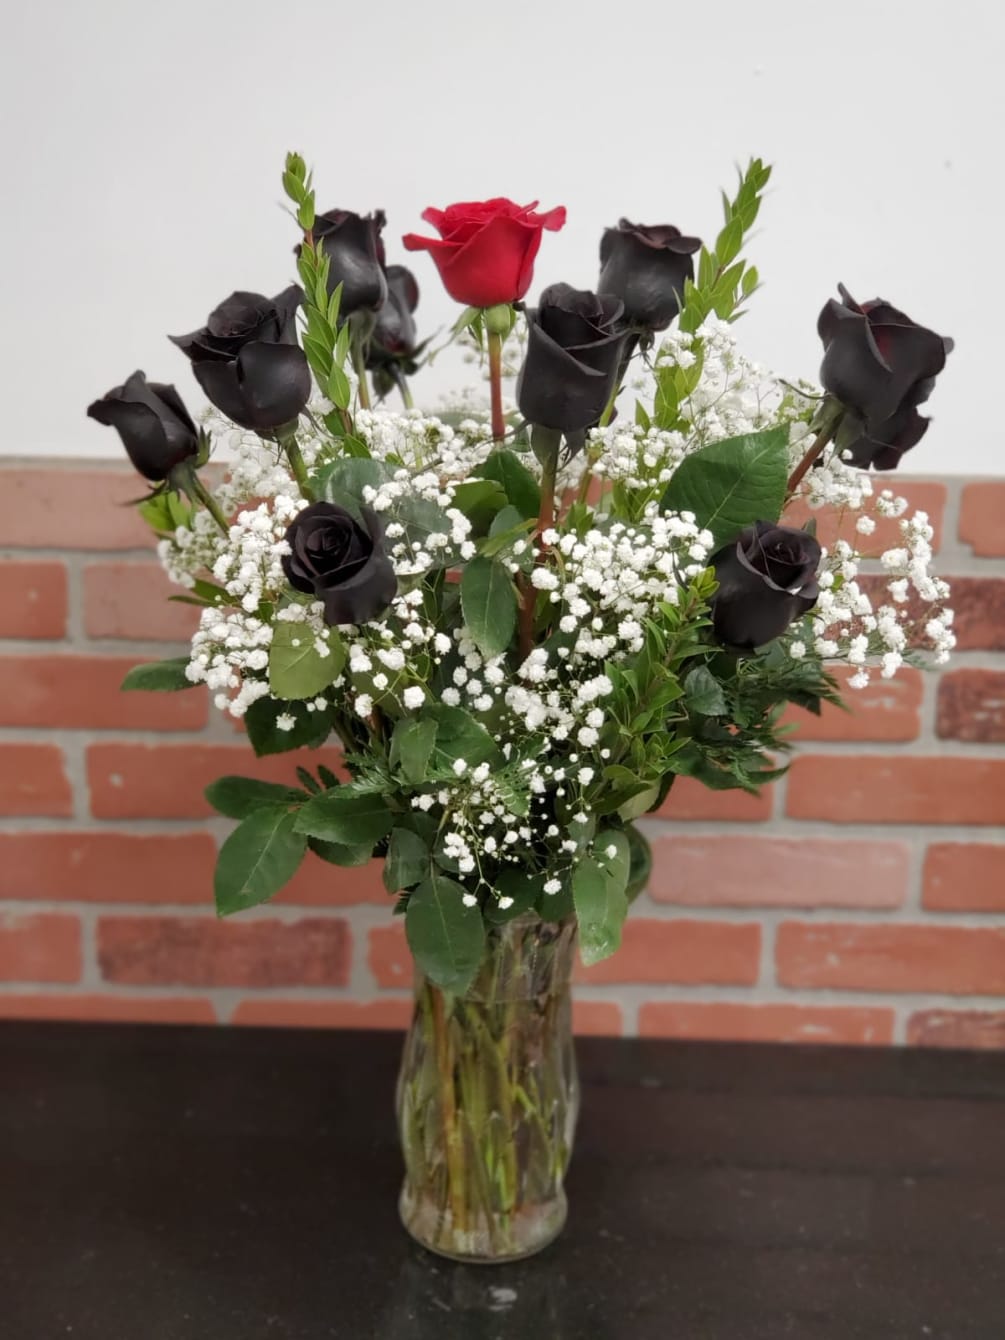 Black Rose&#039;s with 1 Red nice combination like the picture 12 Rose&#039;s